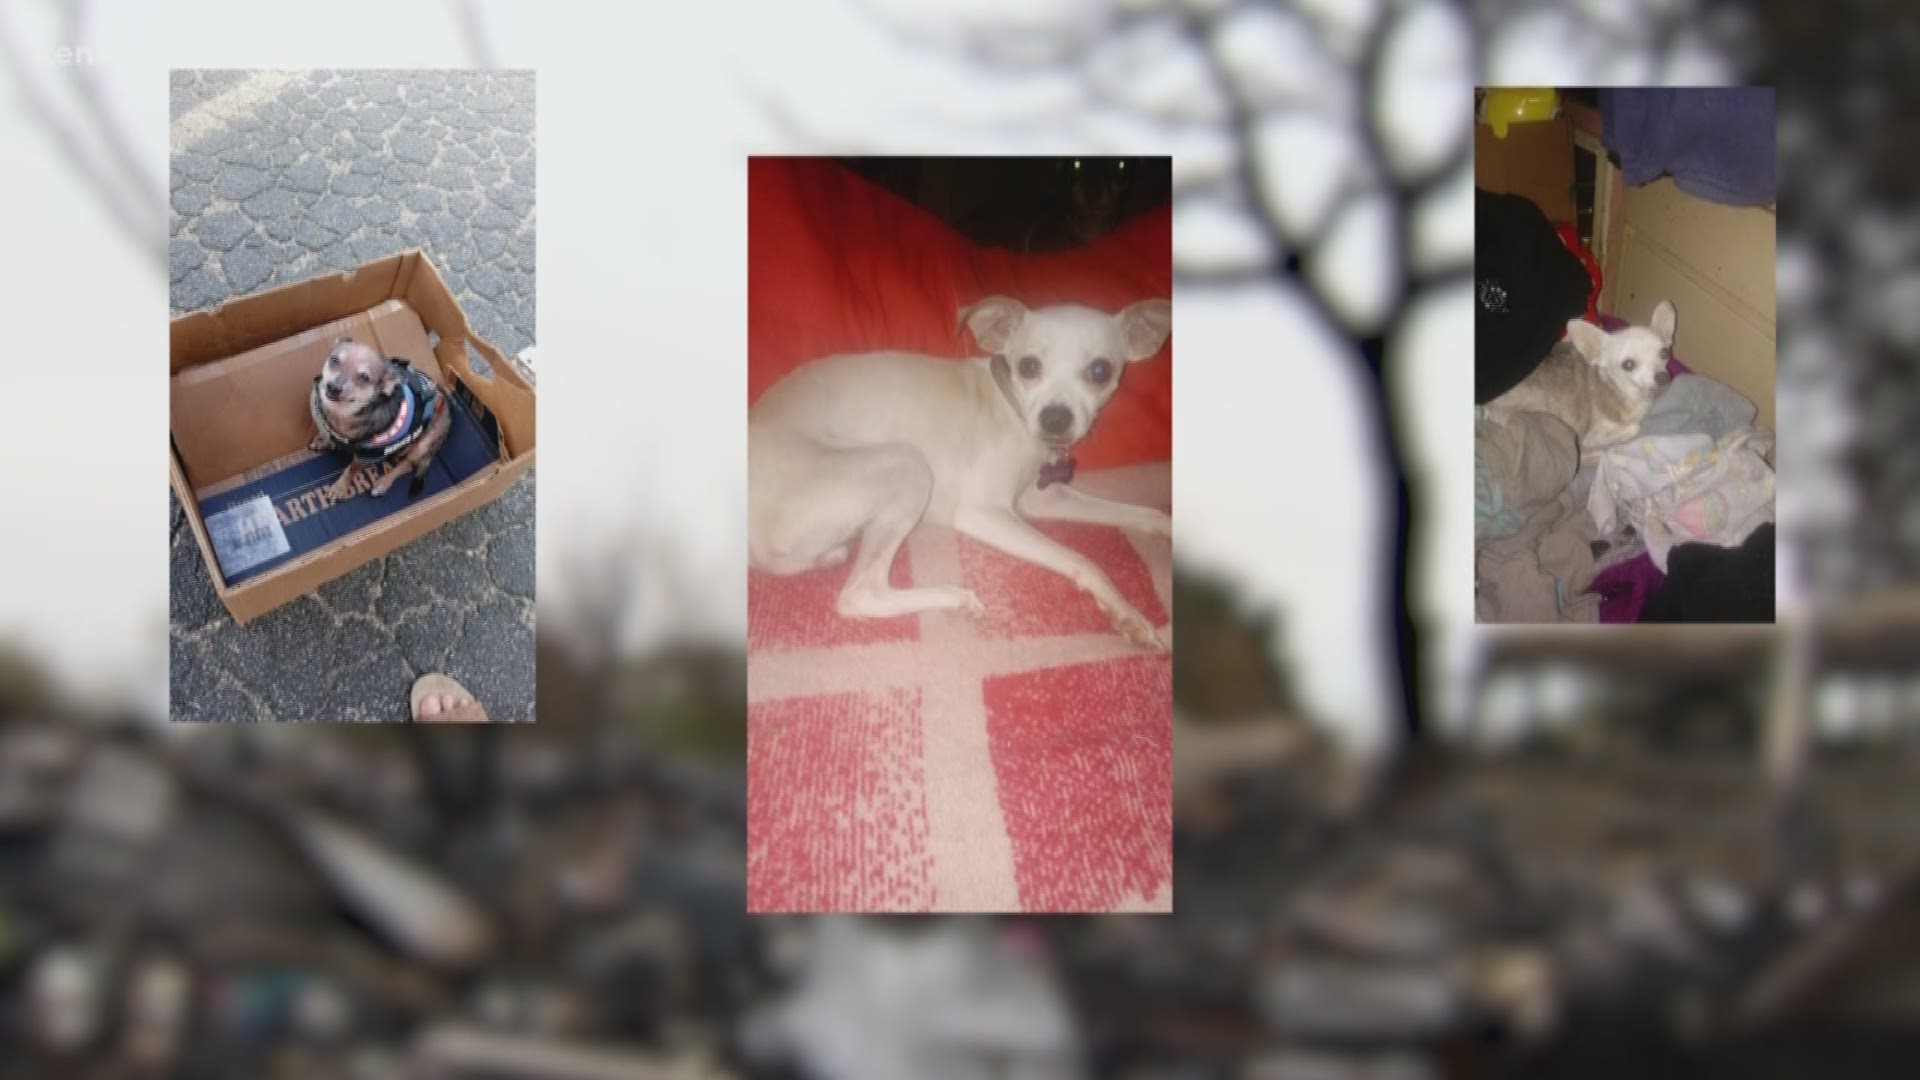 One of the dogs didn’t survive the fire, a few were rescued, but five of their beloved pets are still missing.